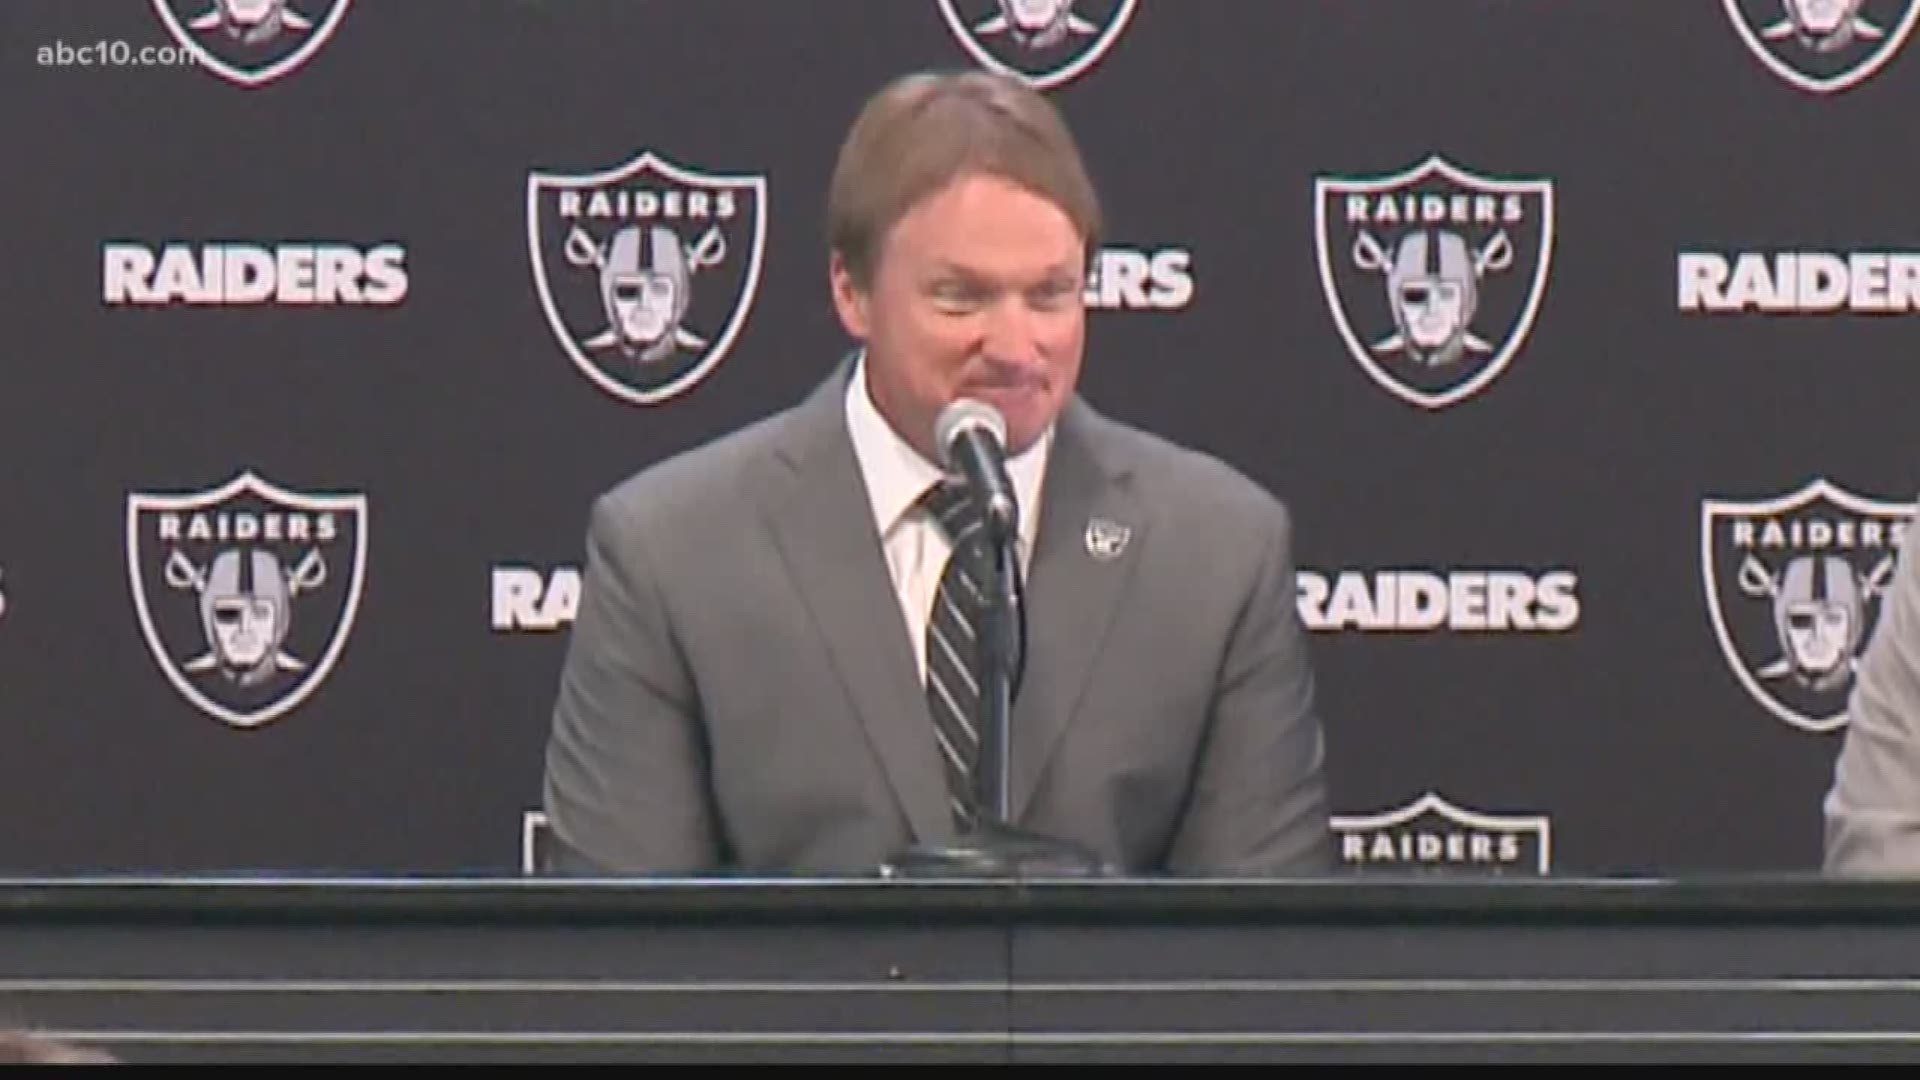 The man they call 'Chucky' was officially welcomed back as head coach following an introductory press conference. "Obviously this is very emotional for me," said Gruden during the press conference. "I never wanted to leave the Raiders [after the 2001 seas